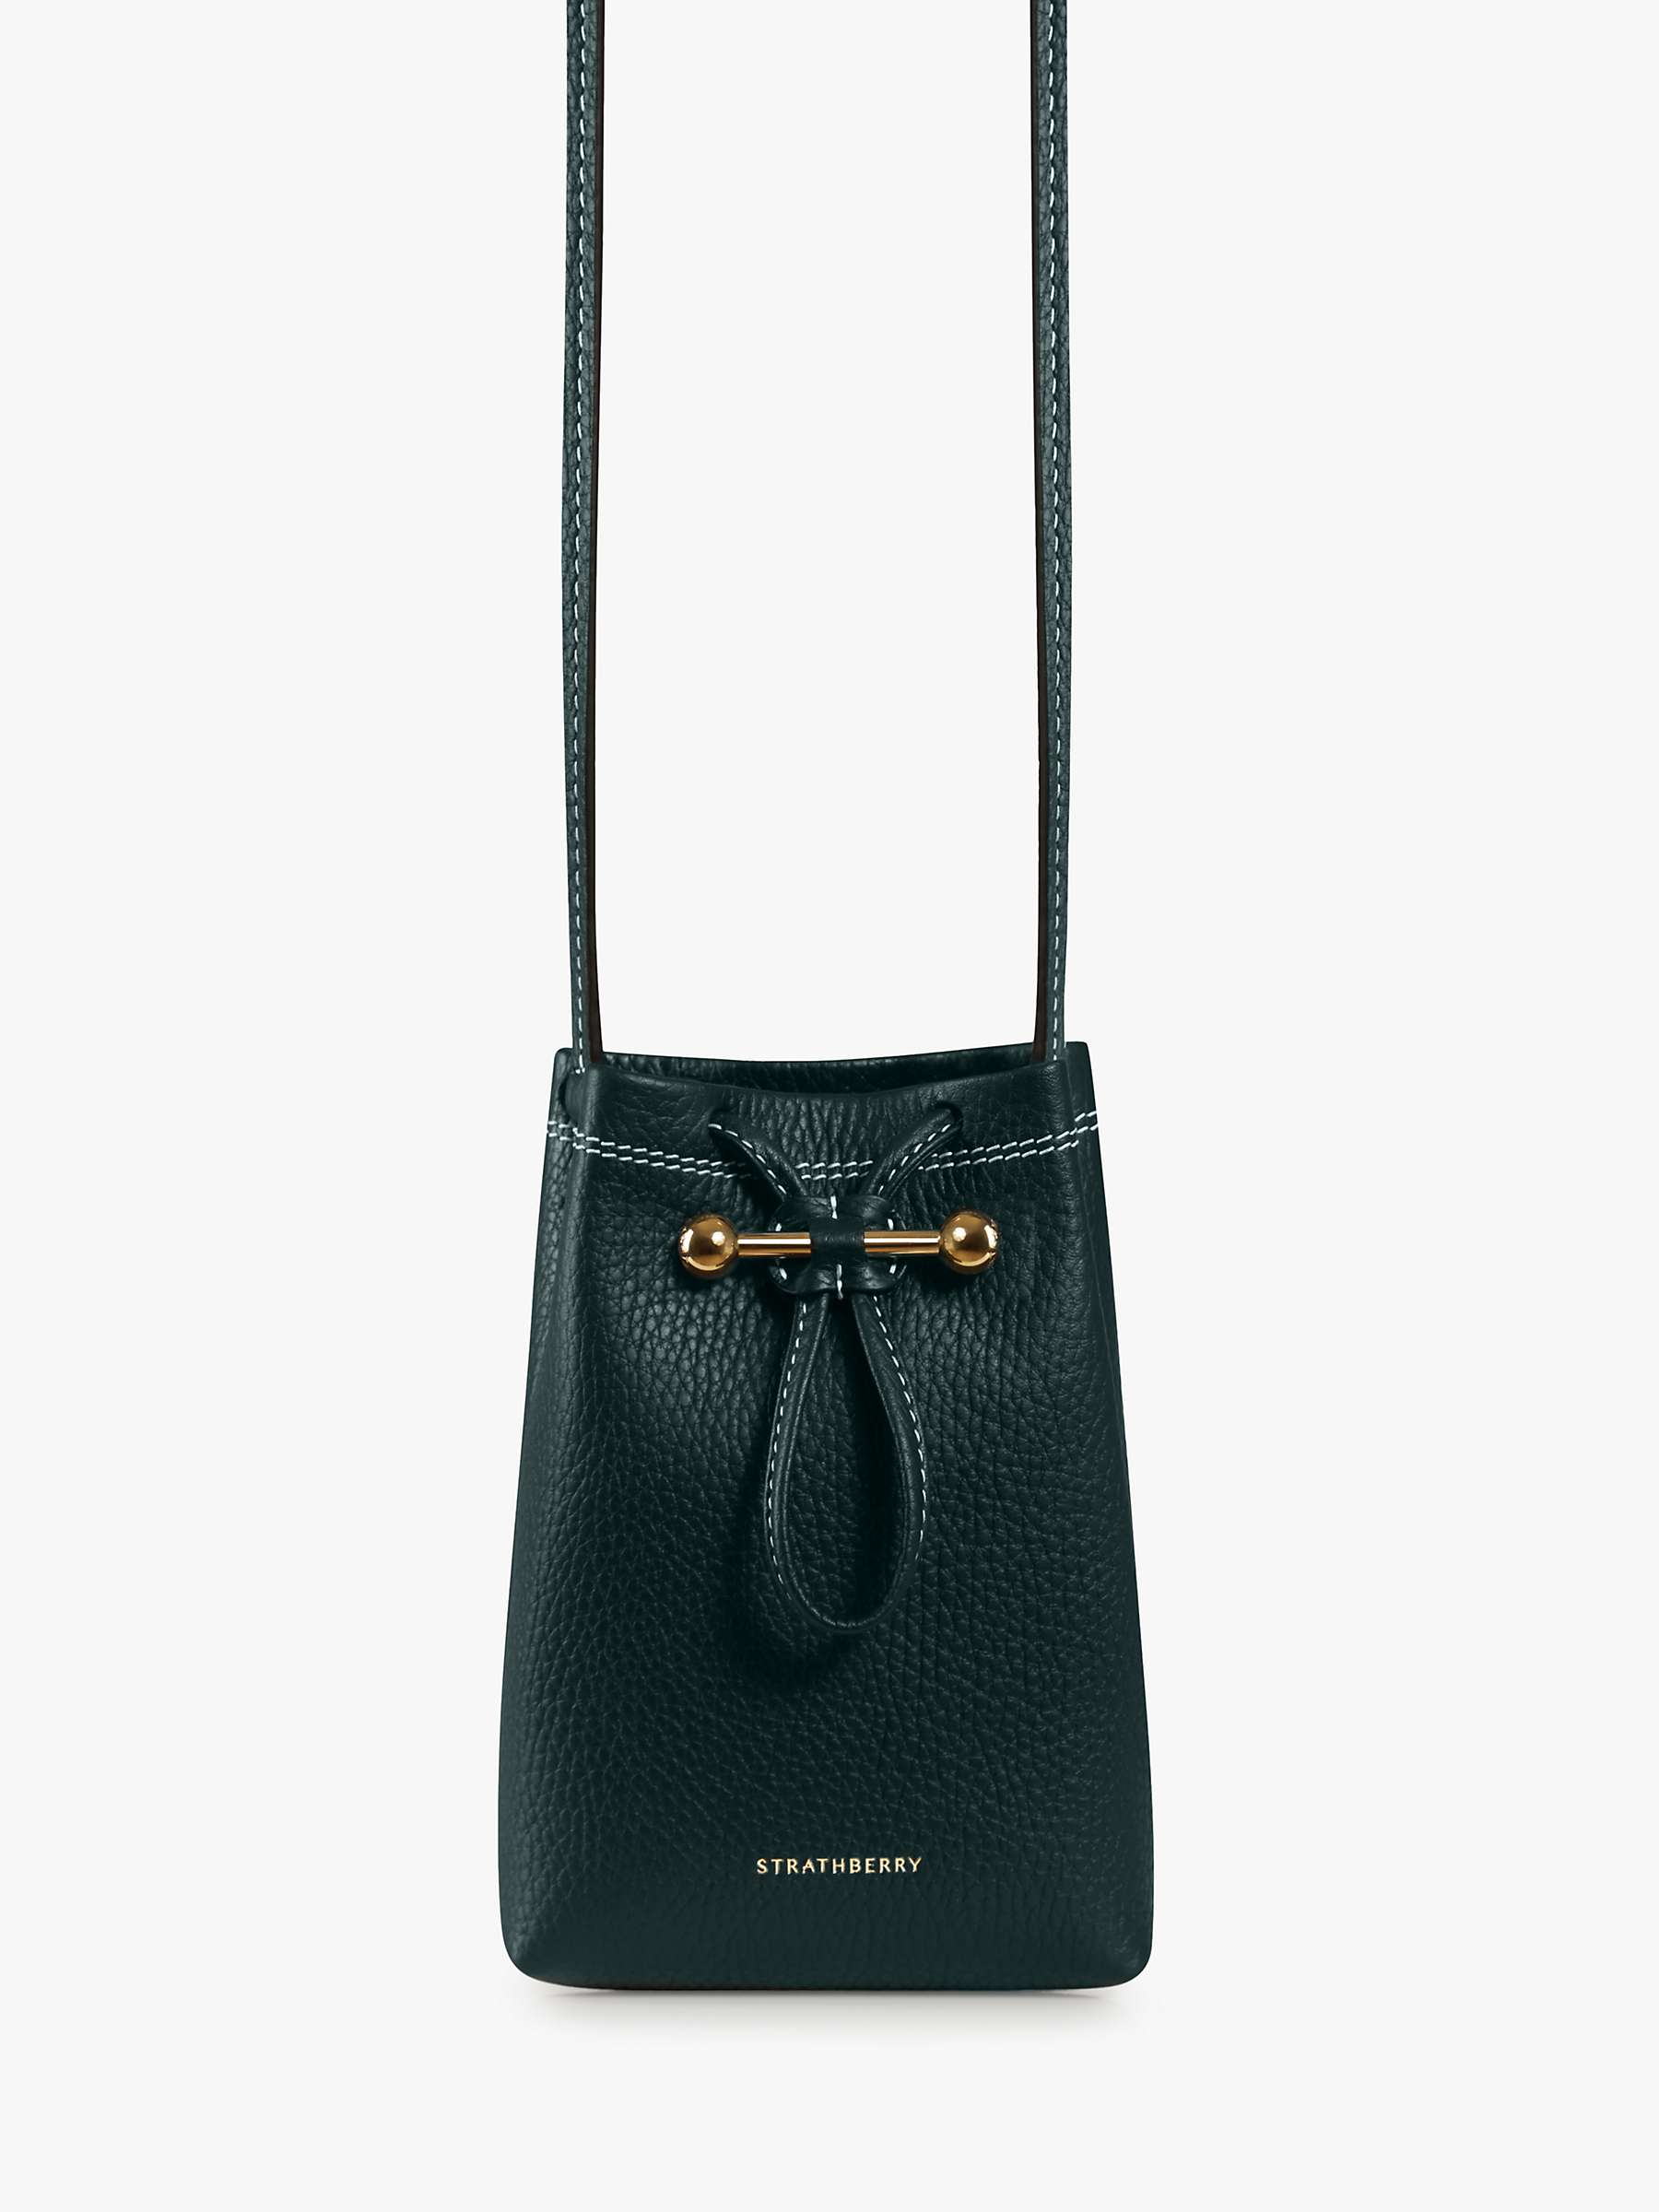 Strathberry Osette Leather Pouch Bag, Bottle Green at John Lewis & Partners